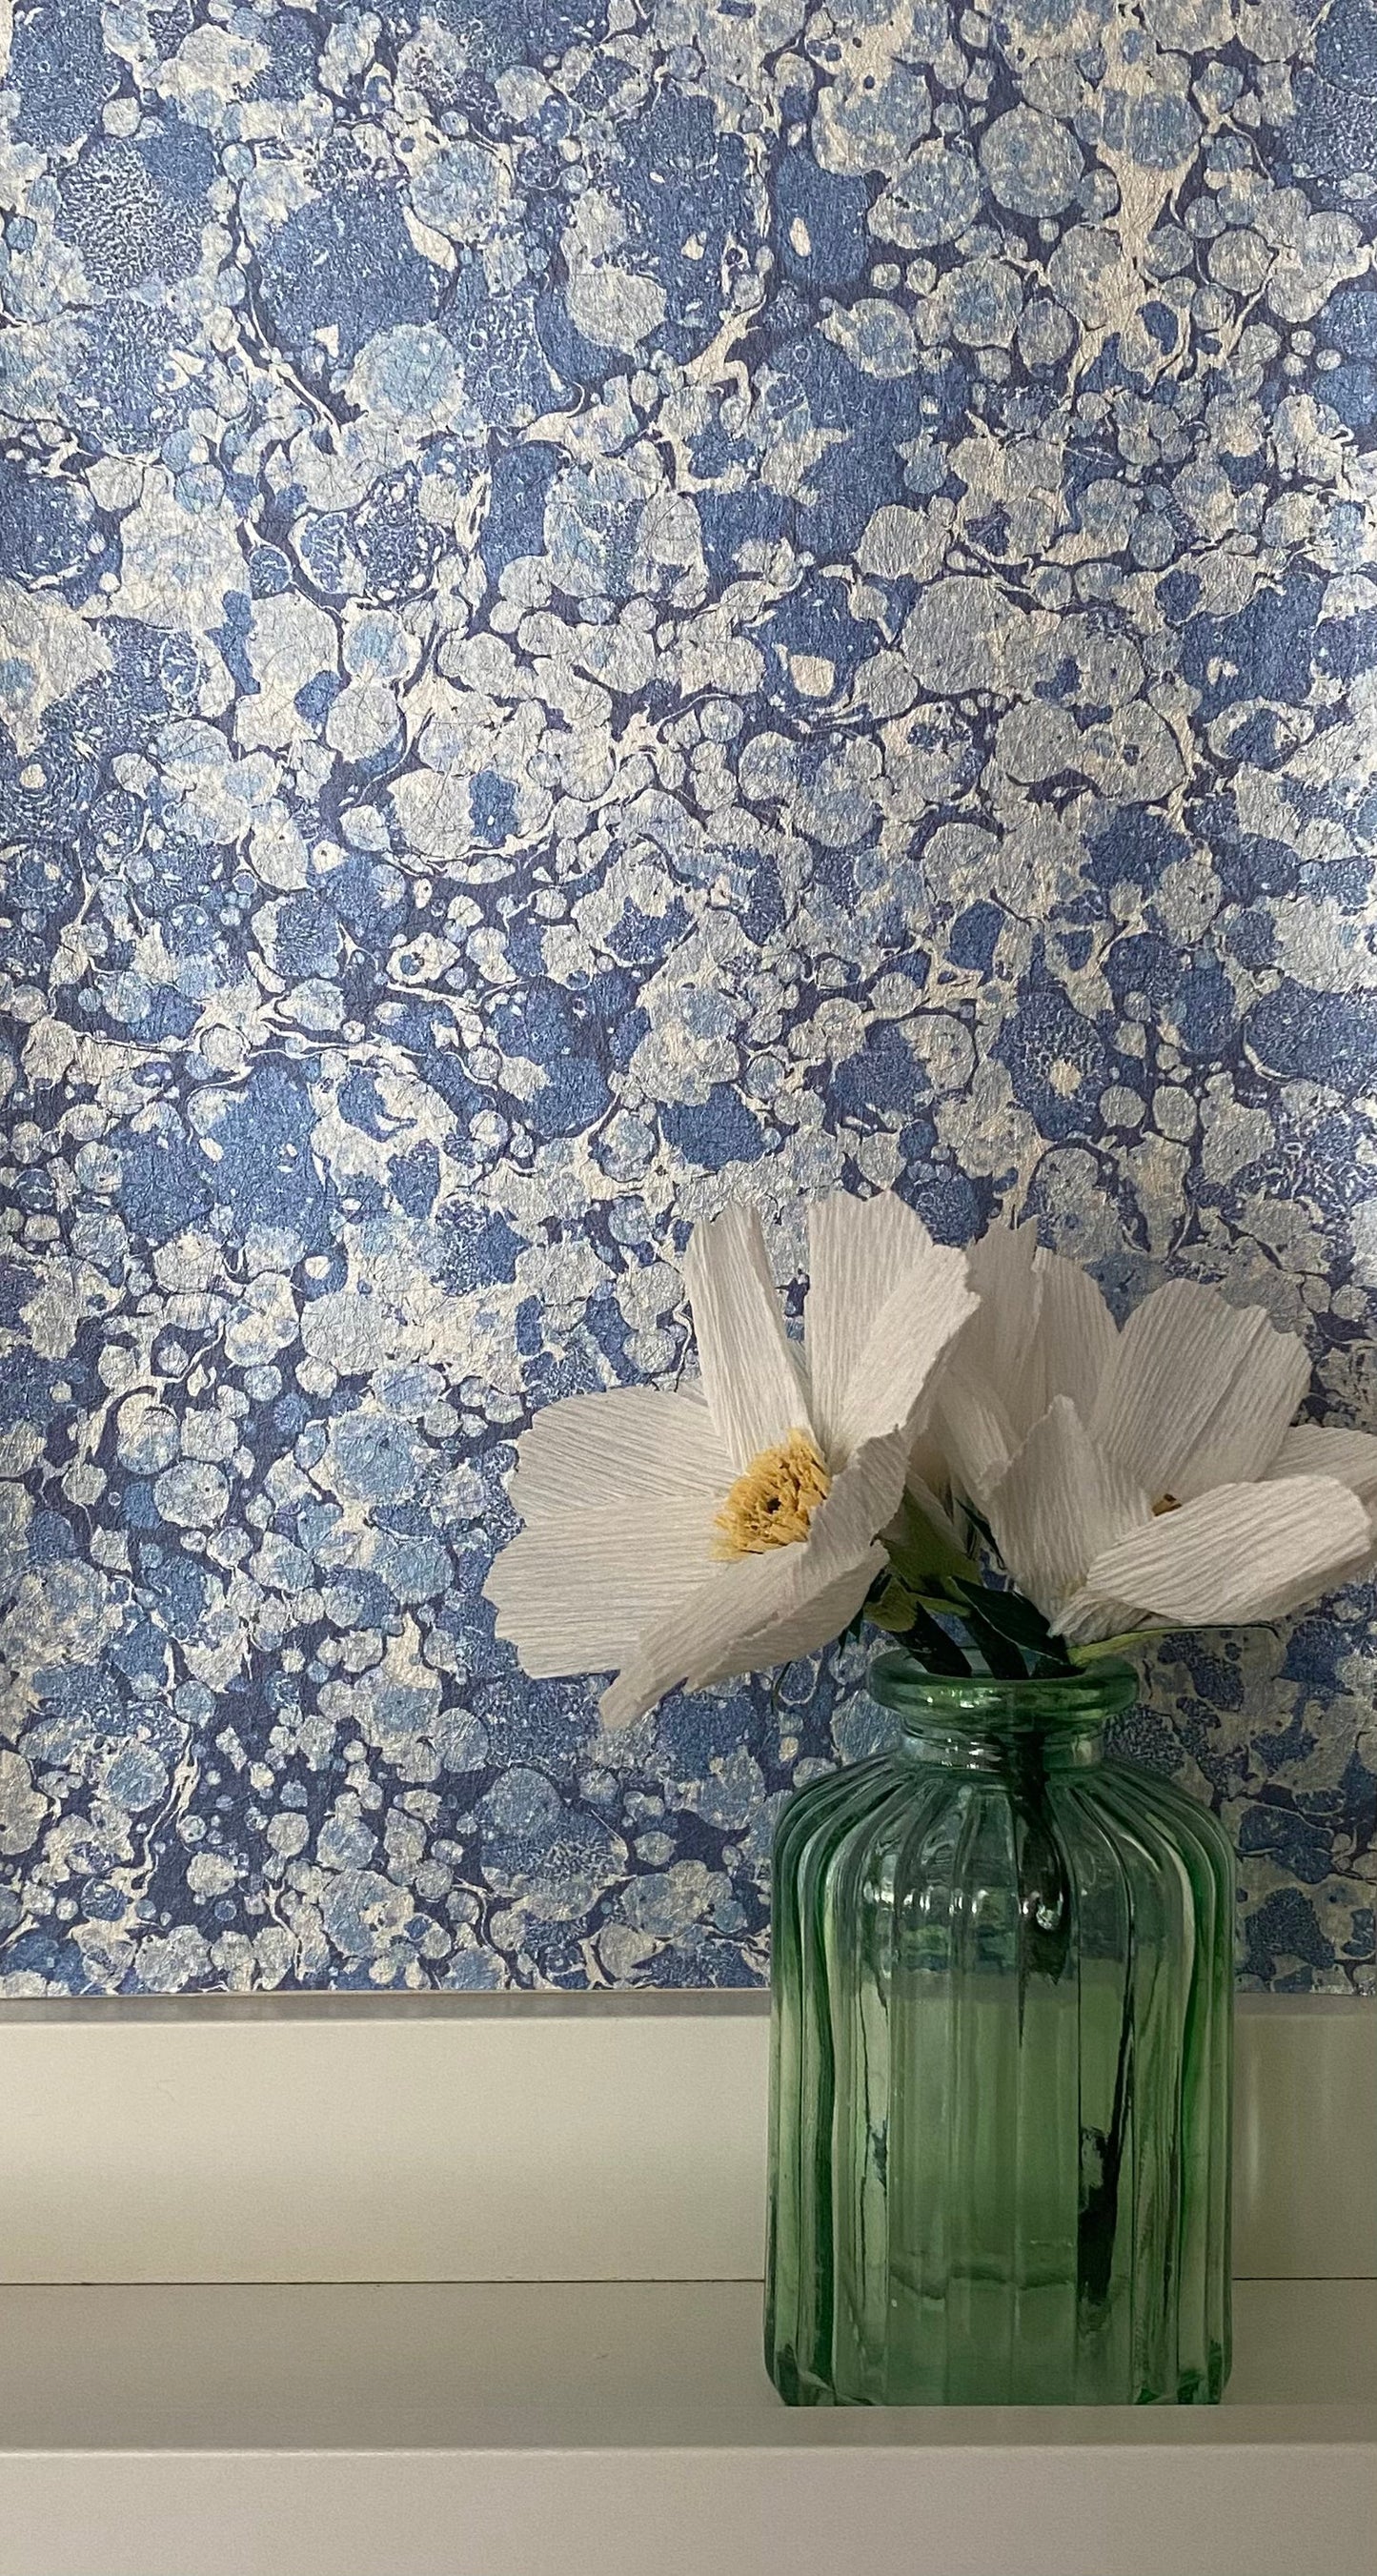 In Stock: Printed Wallpaper - 'Ditzy' Col: Blue Daze - Mica Coated Non-Woven